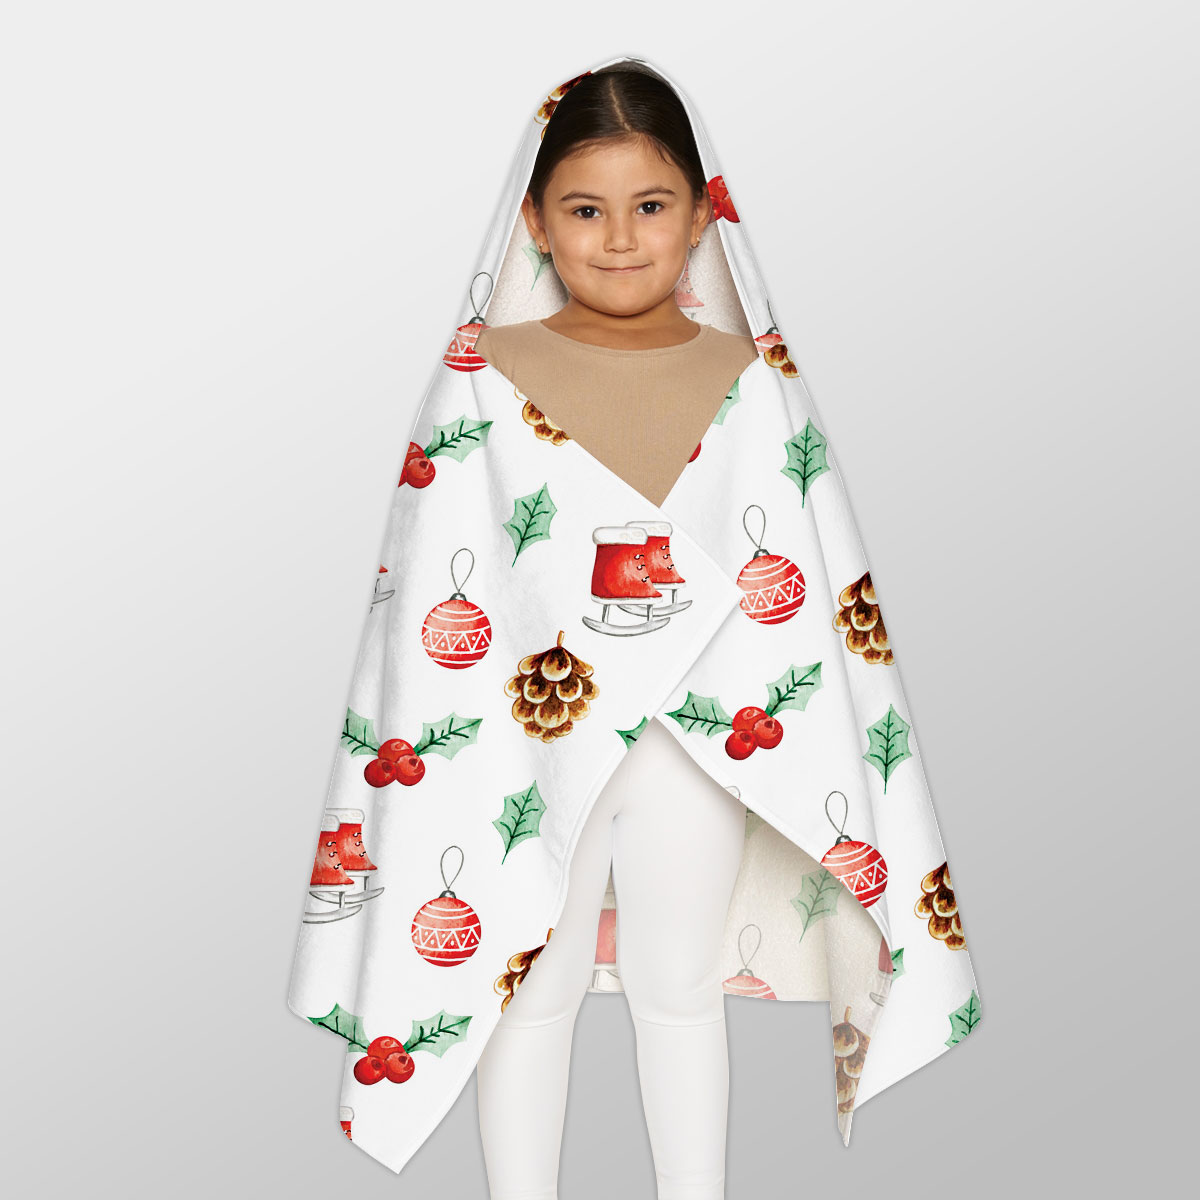 Ice Skates, Holly Leaf, Pine Cone And Christmas Baubles Youth Hooded Towel